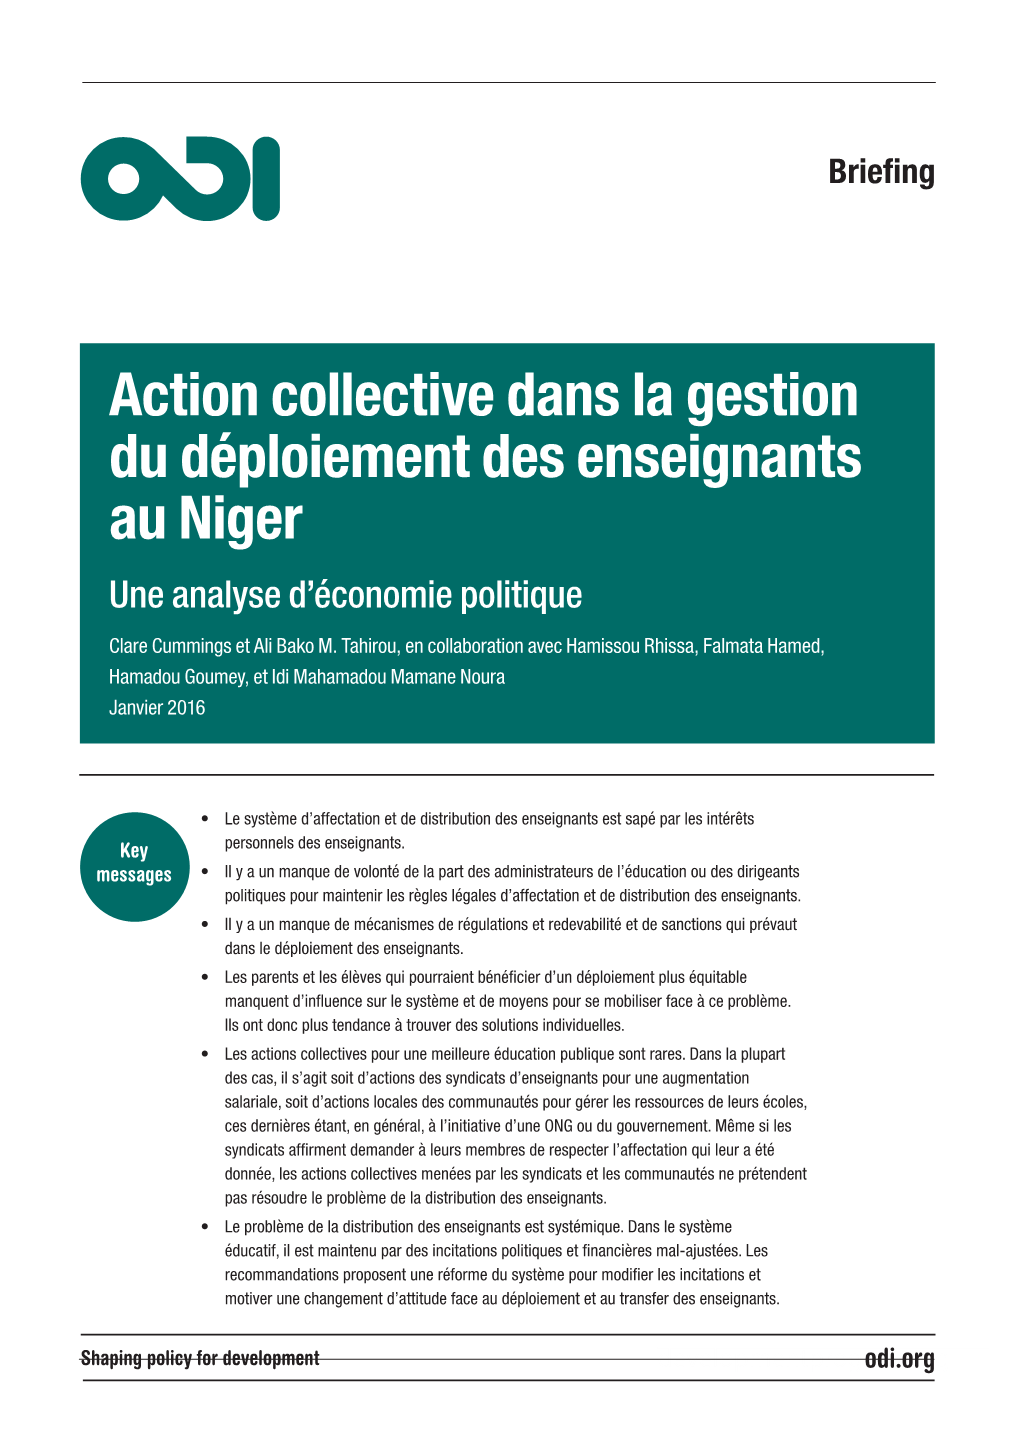 Collective Action and the Deployment of Teachers in Niger